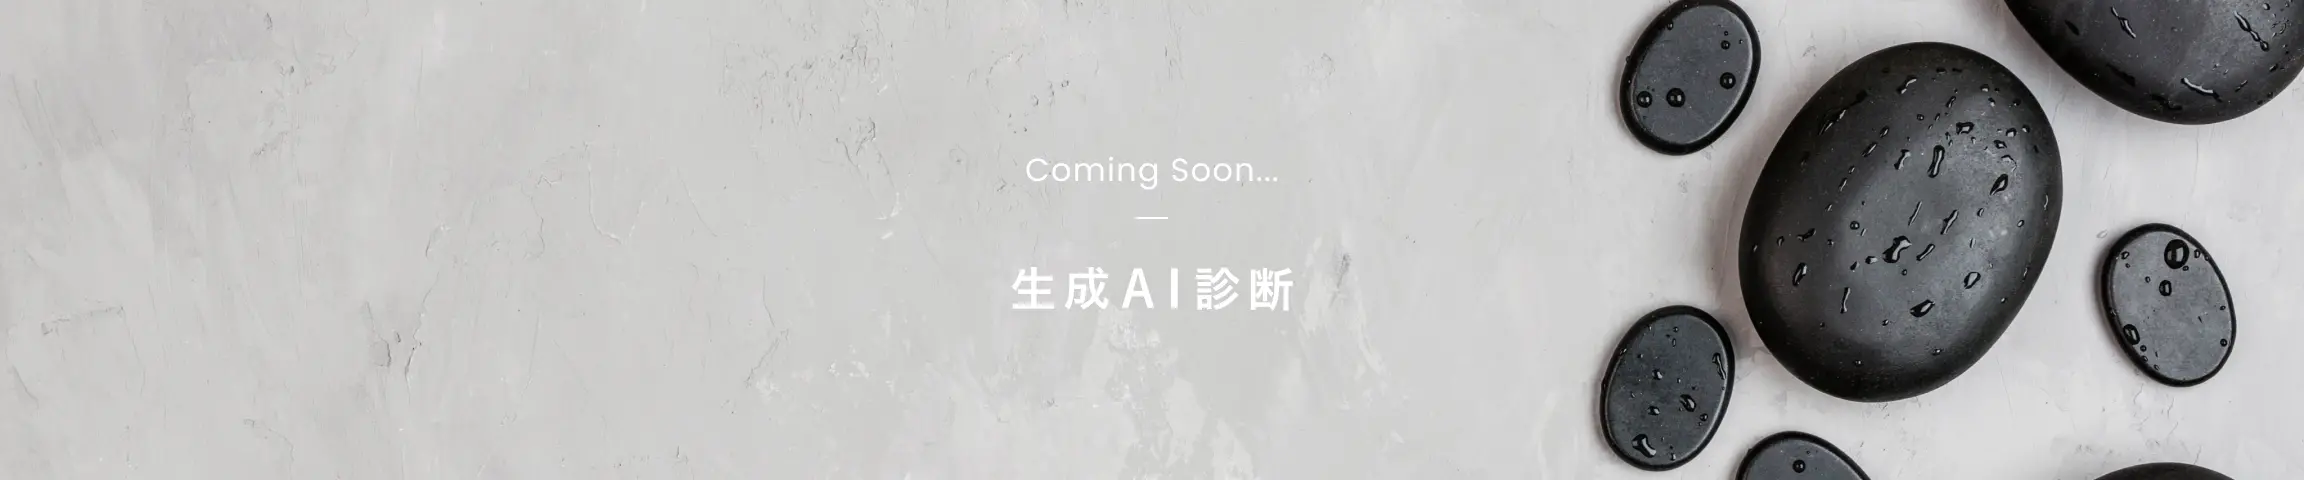 AI生成診断：Coming soon